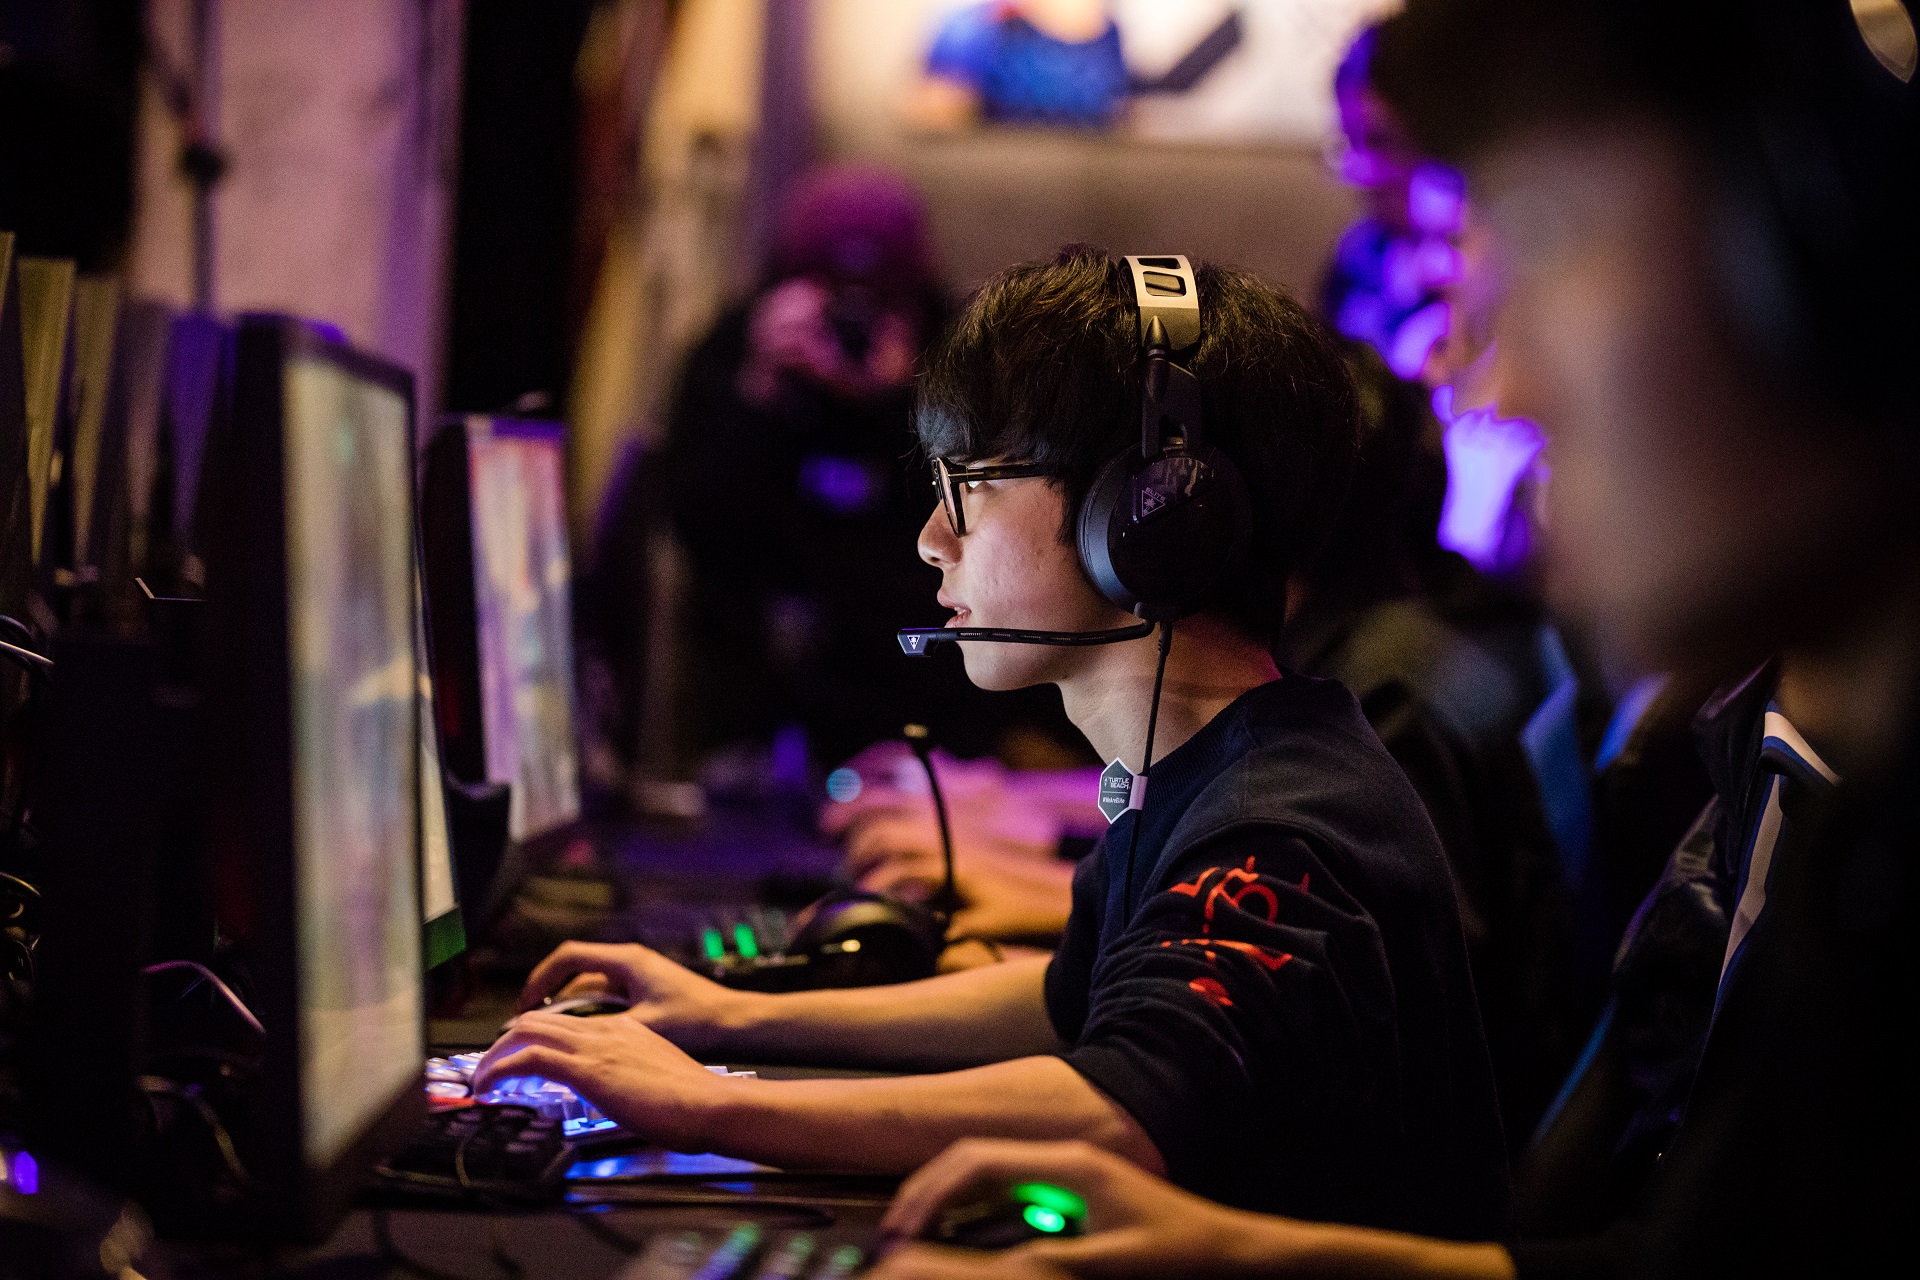 NYXL held a homecoming event where amateur New York players competed against the team’s professionals. Eagle photos by Paul Frangipane